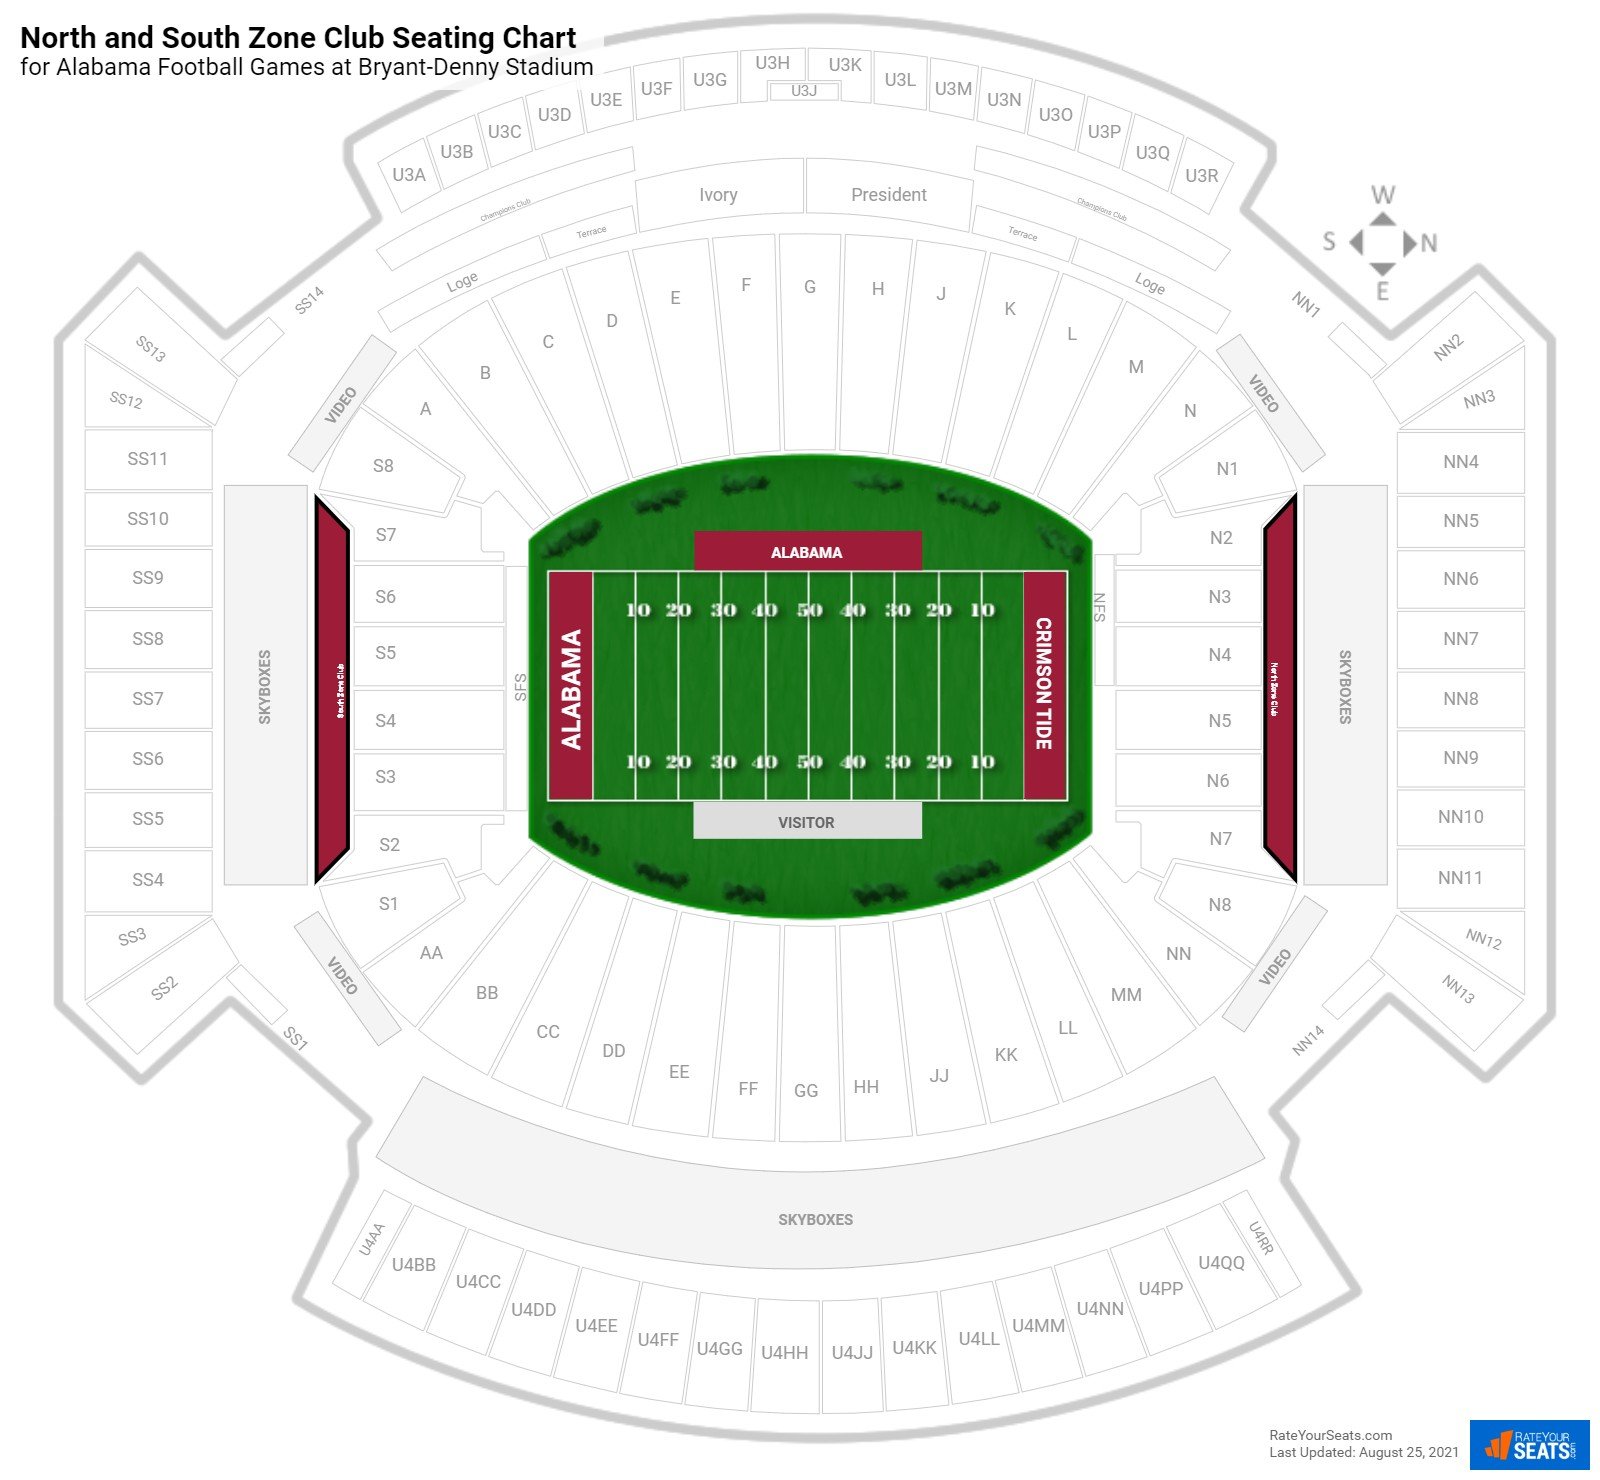 Alabama North and South Zone Club Seating Chart at Bryant-Denny Stadium